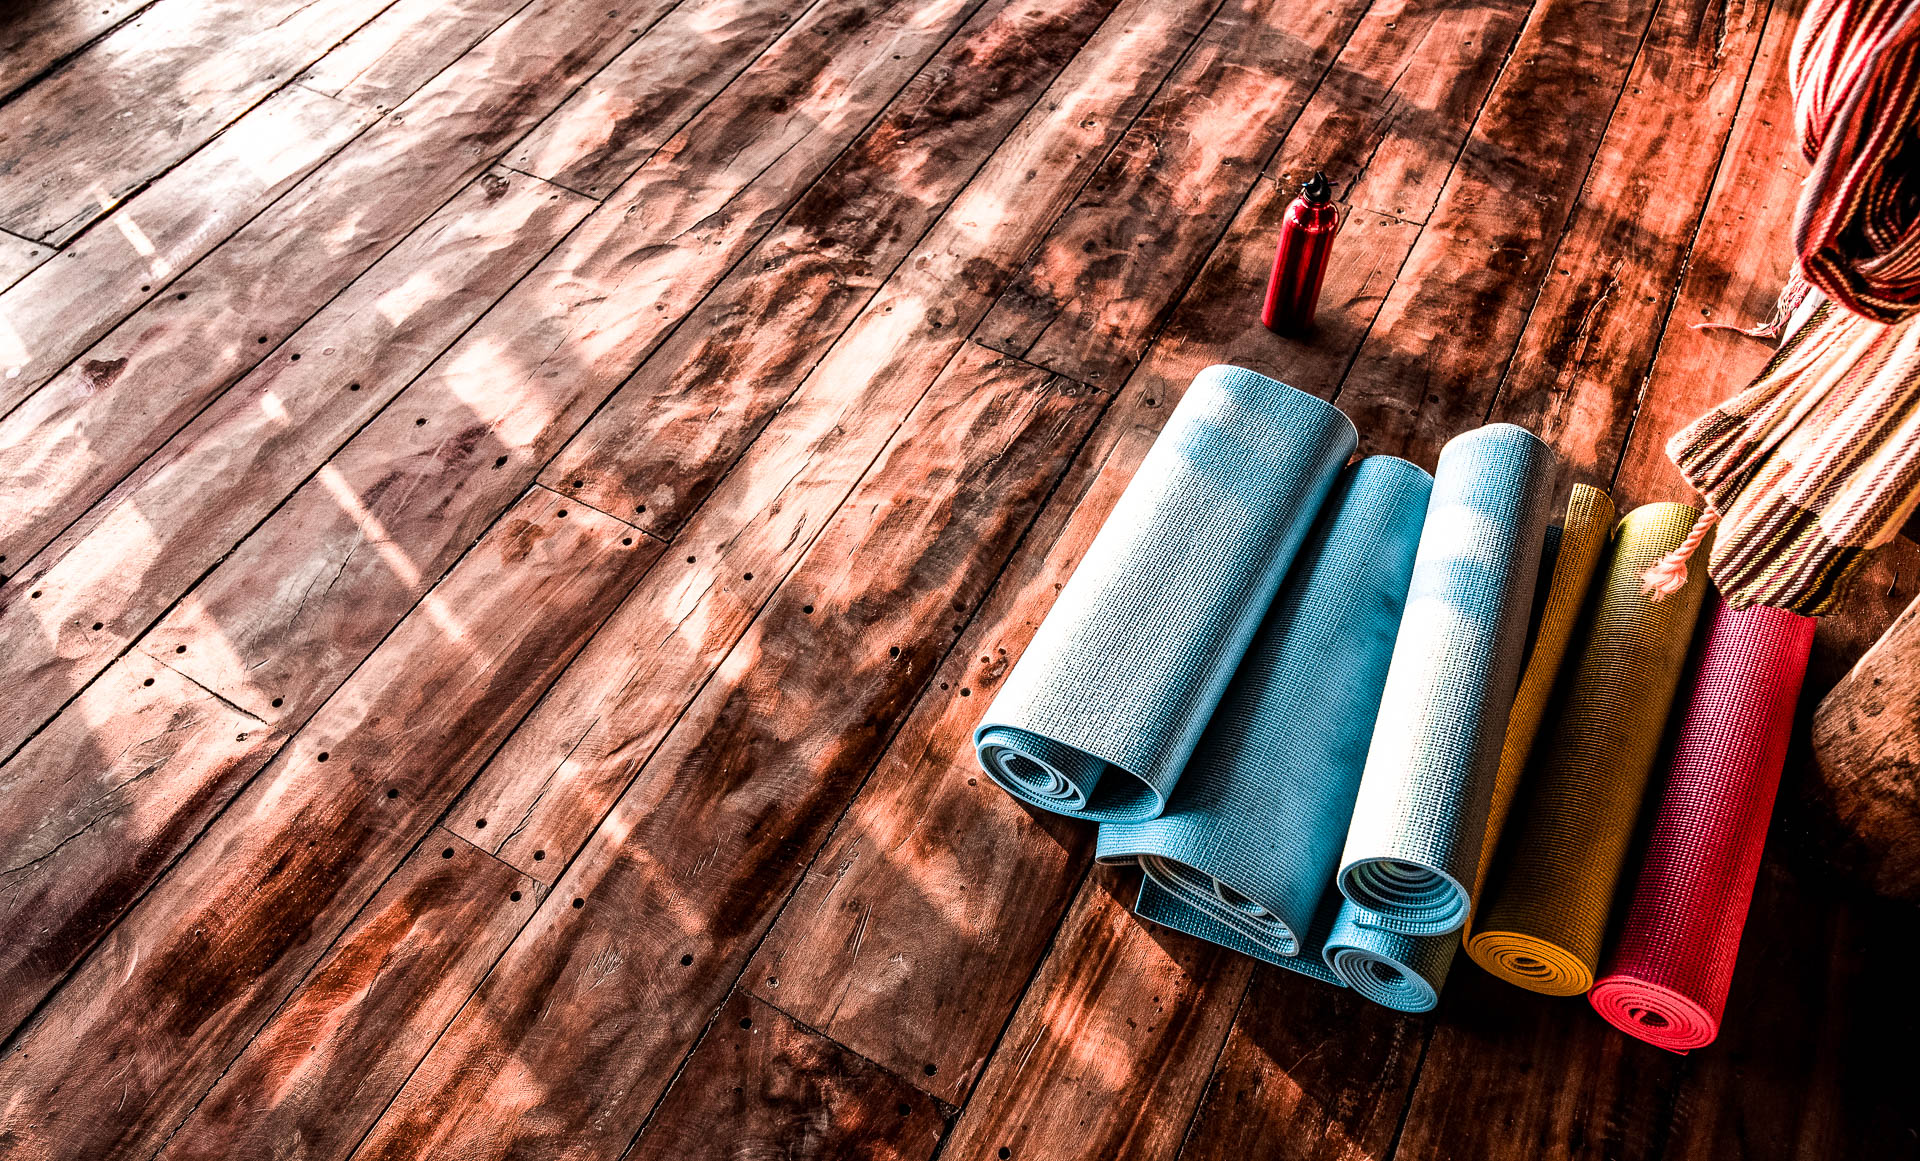 Wooden floor with multiple yoga mats rolled up and kept together.